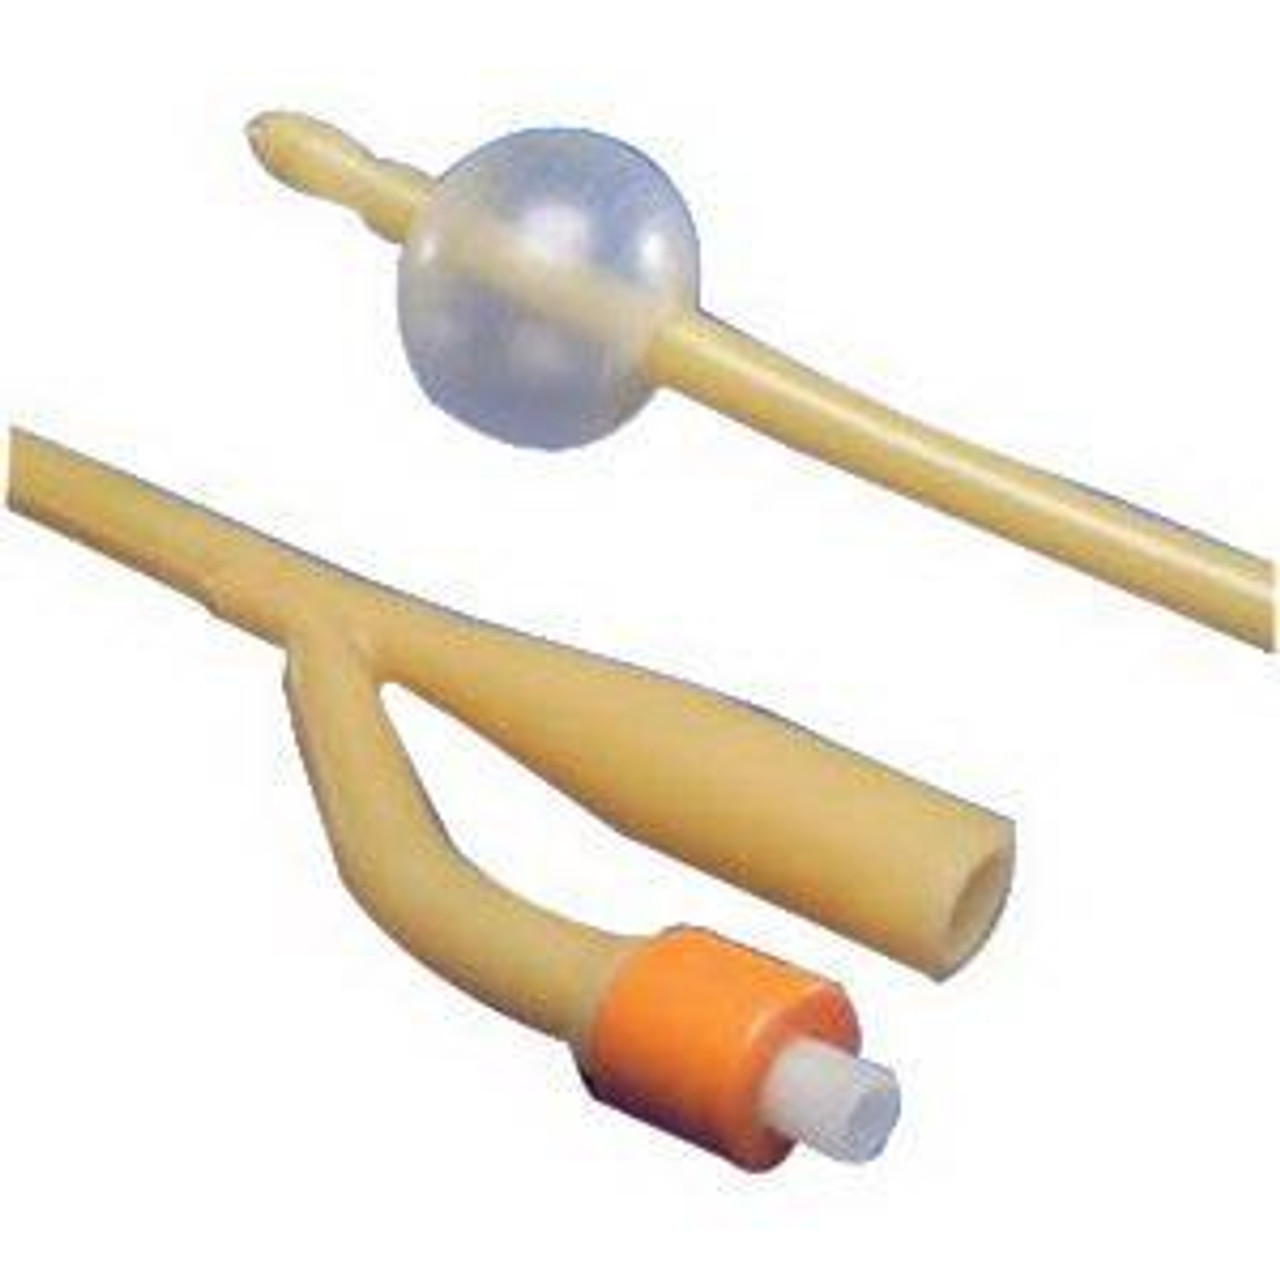 Kendall 1616C CTN/12 DOVER 2-WAY HYDROGEL COATED LATEX FOLEY CATHETER, COUDE, SIZE 16FR 5CC (Kendall 1616C)